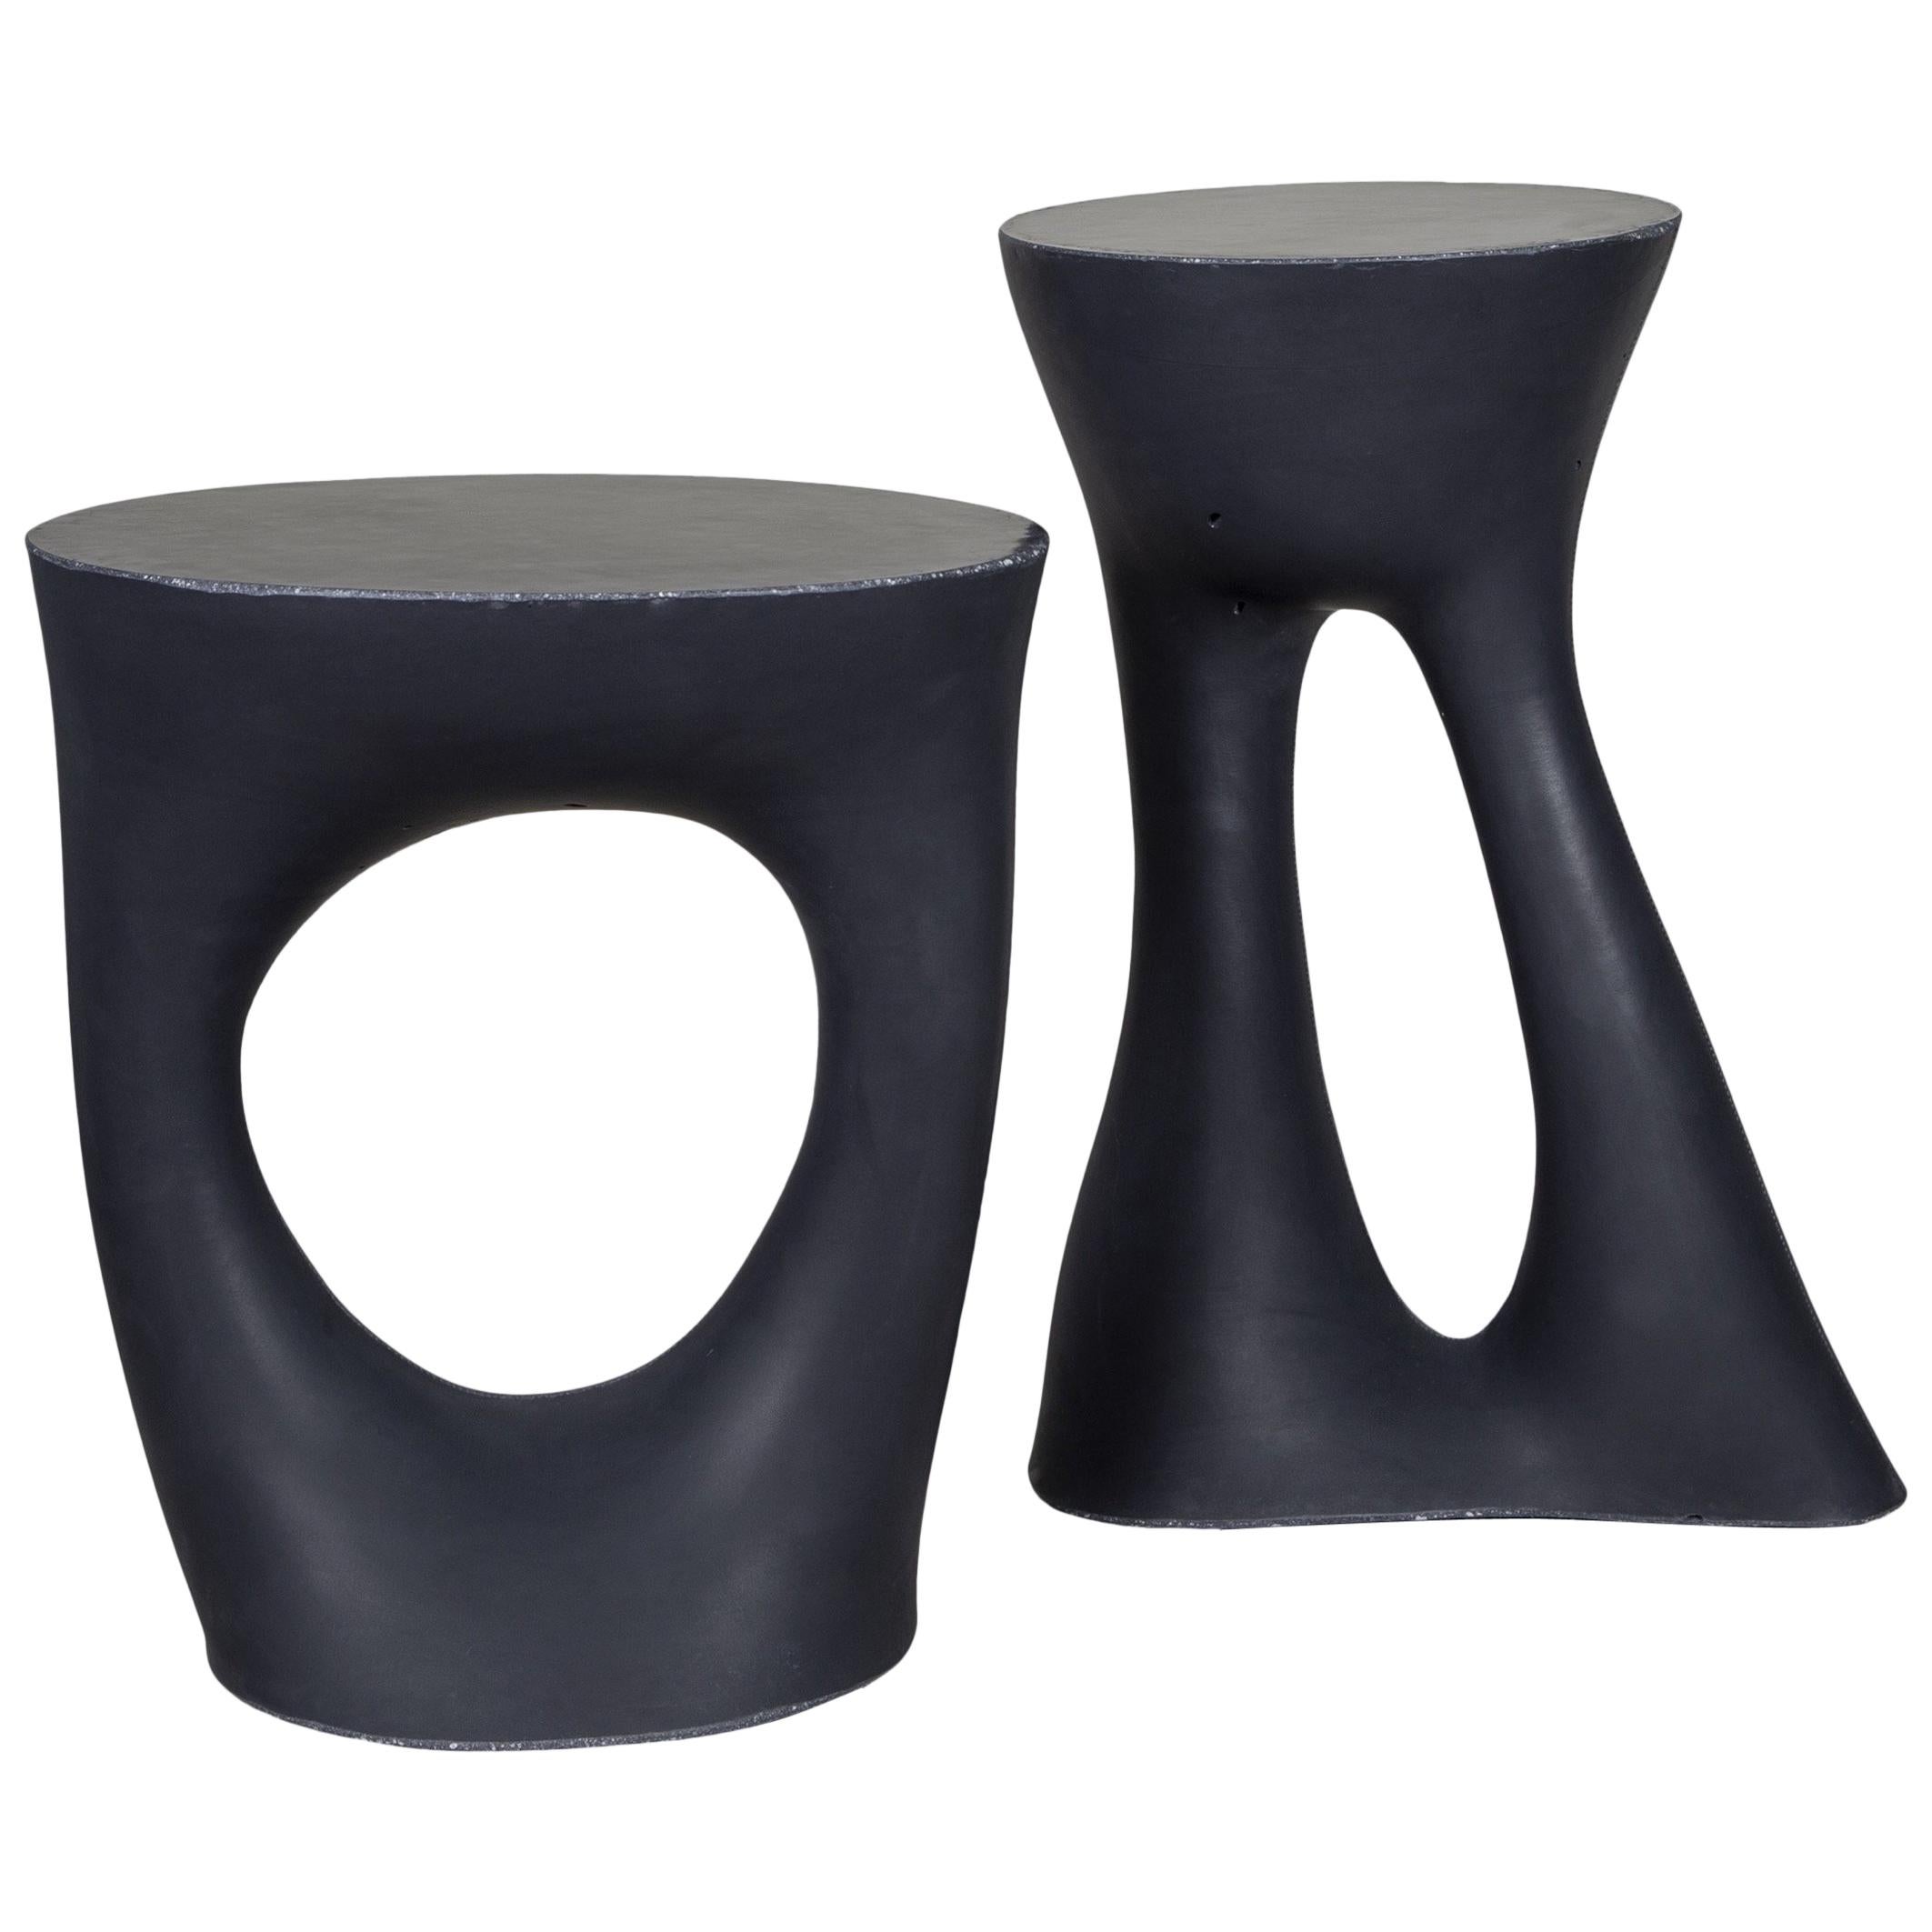 Pair of Black Kreten Side Tables from Souda, Made to Order